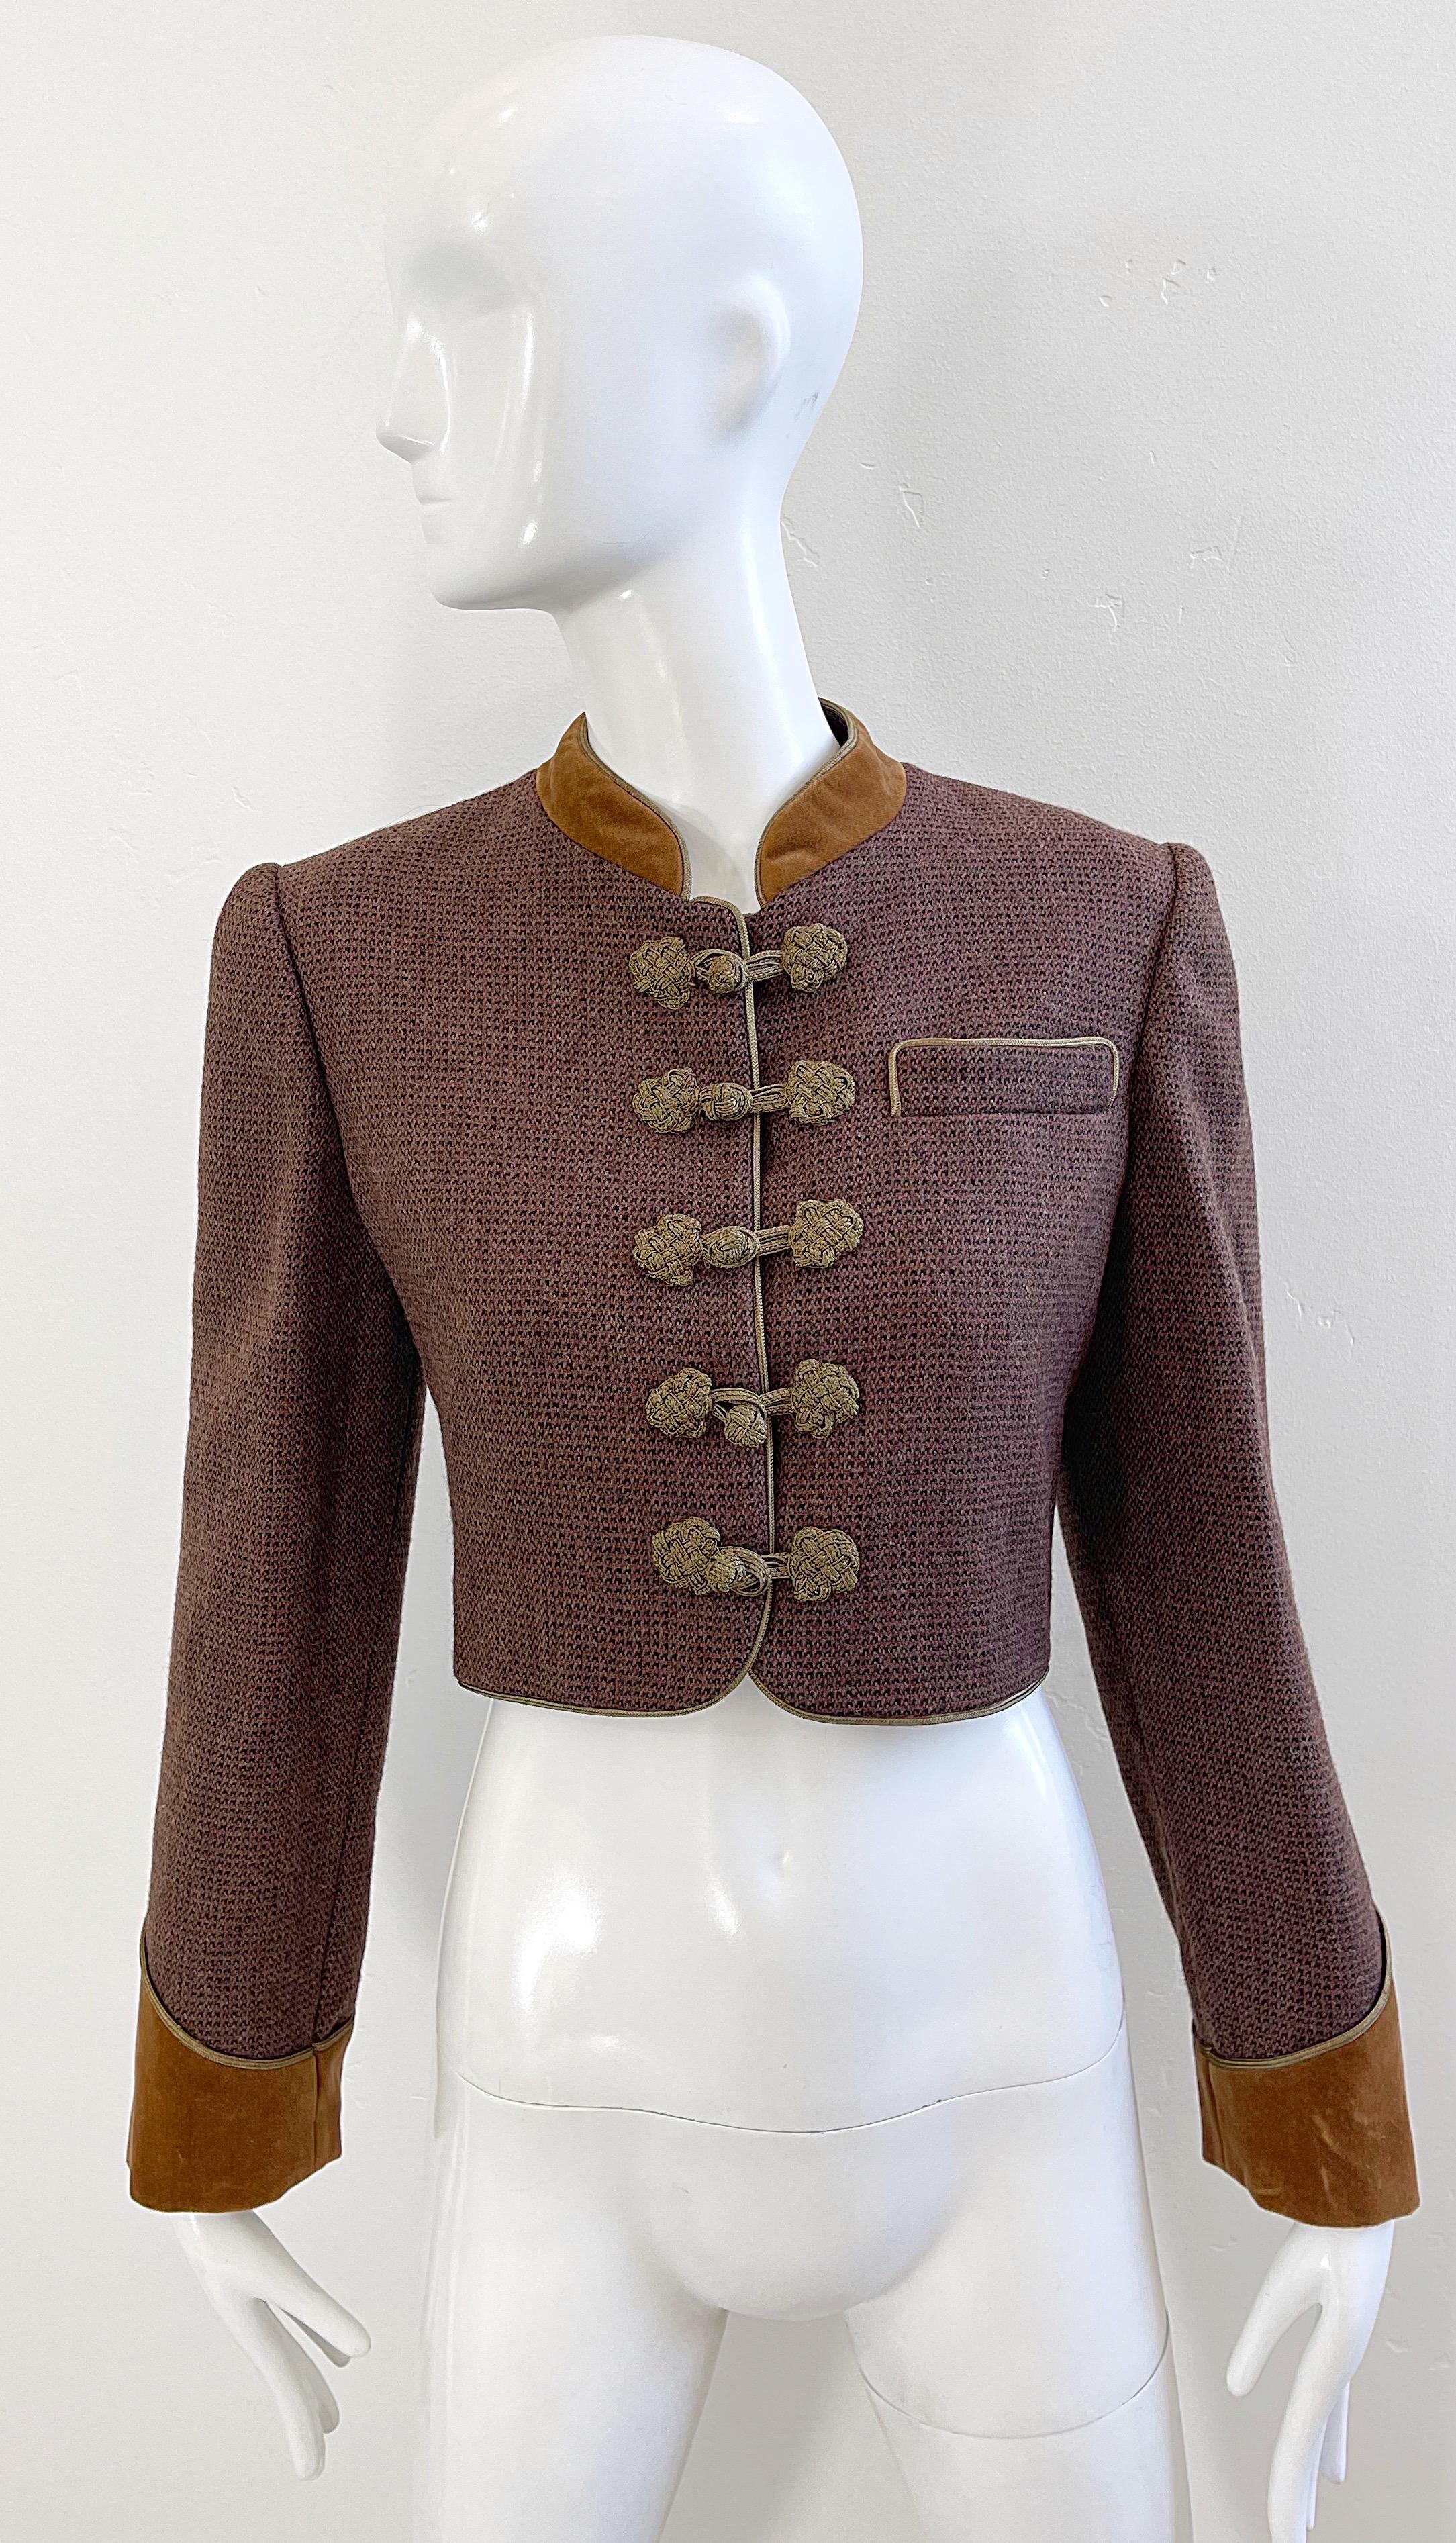 Chic vintage early 90s OSCAR DE LA RENTA burgundy and rust brown wool and velvet crop jacket ! Knotted buttons up the front. Breast pocket. Fully lined
Layer this over a tank and jeans, or pair with a pencil skirt.
In great condition
Made in